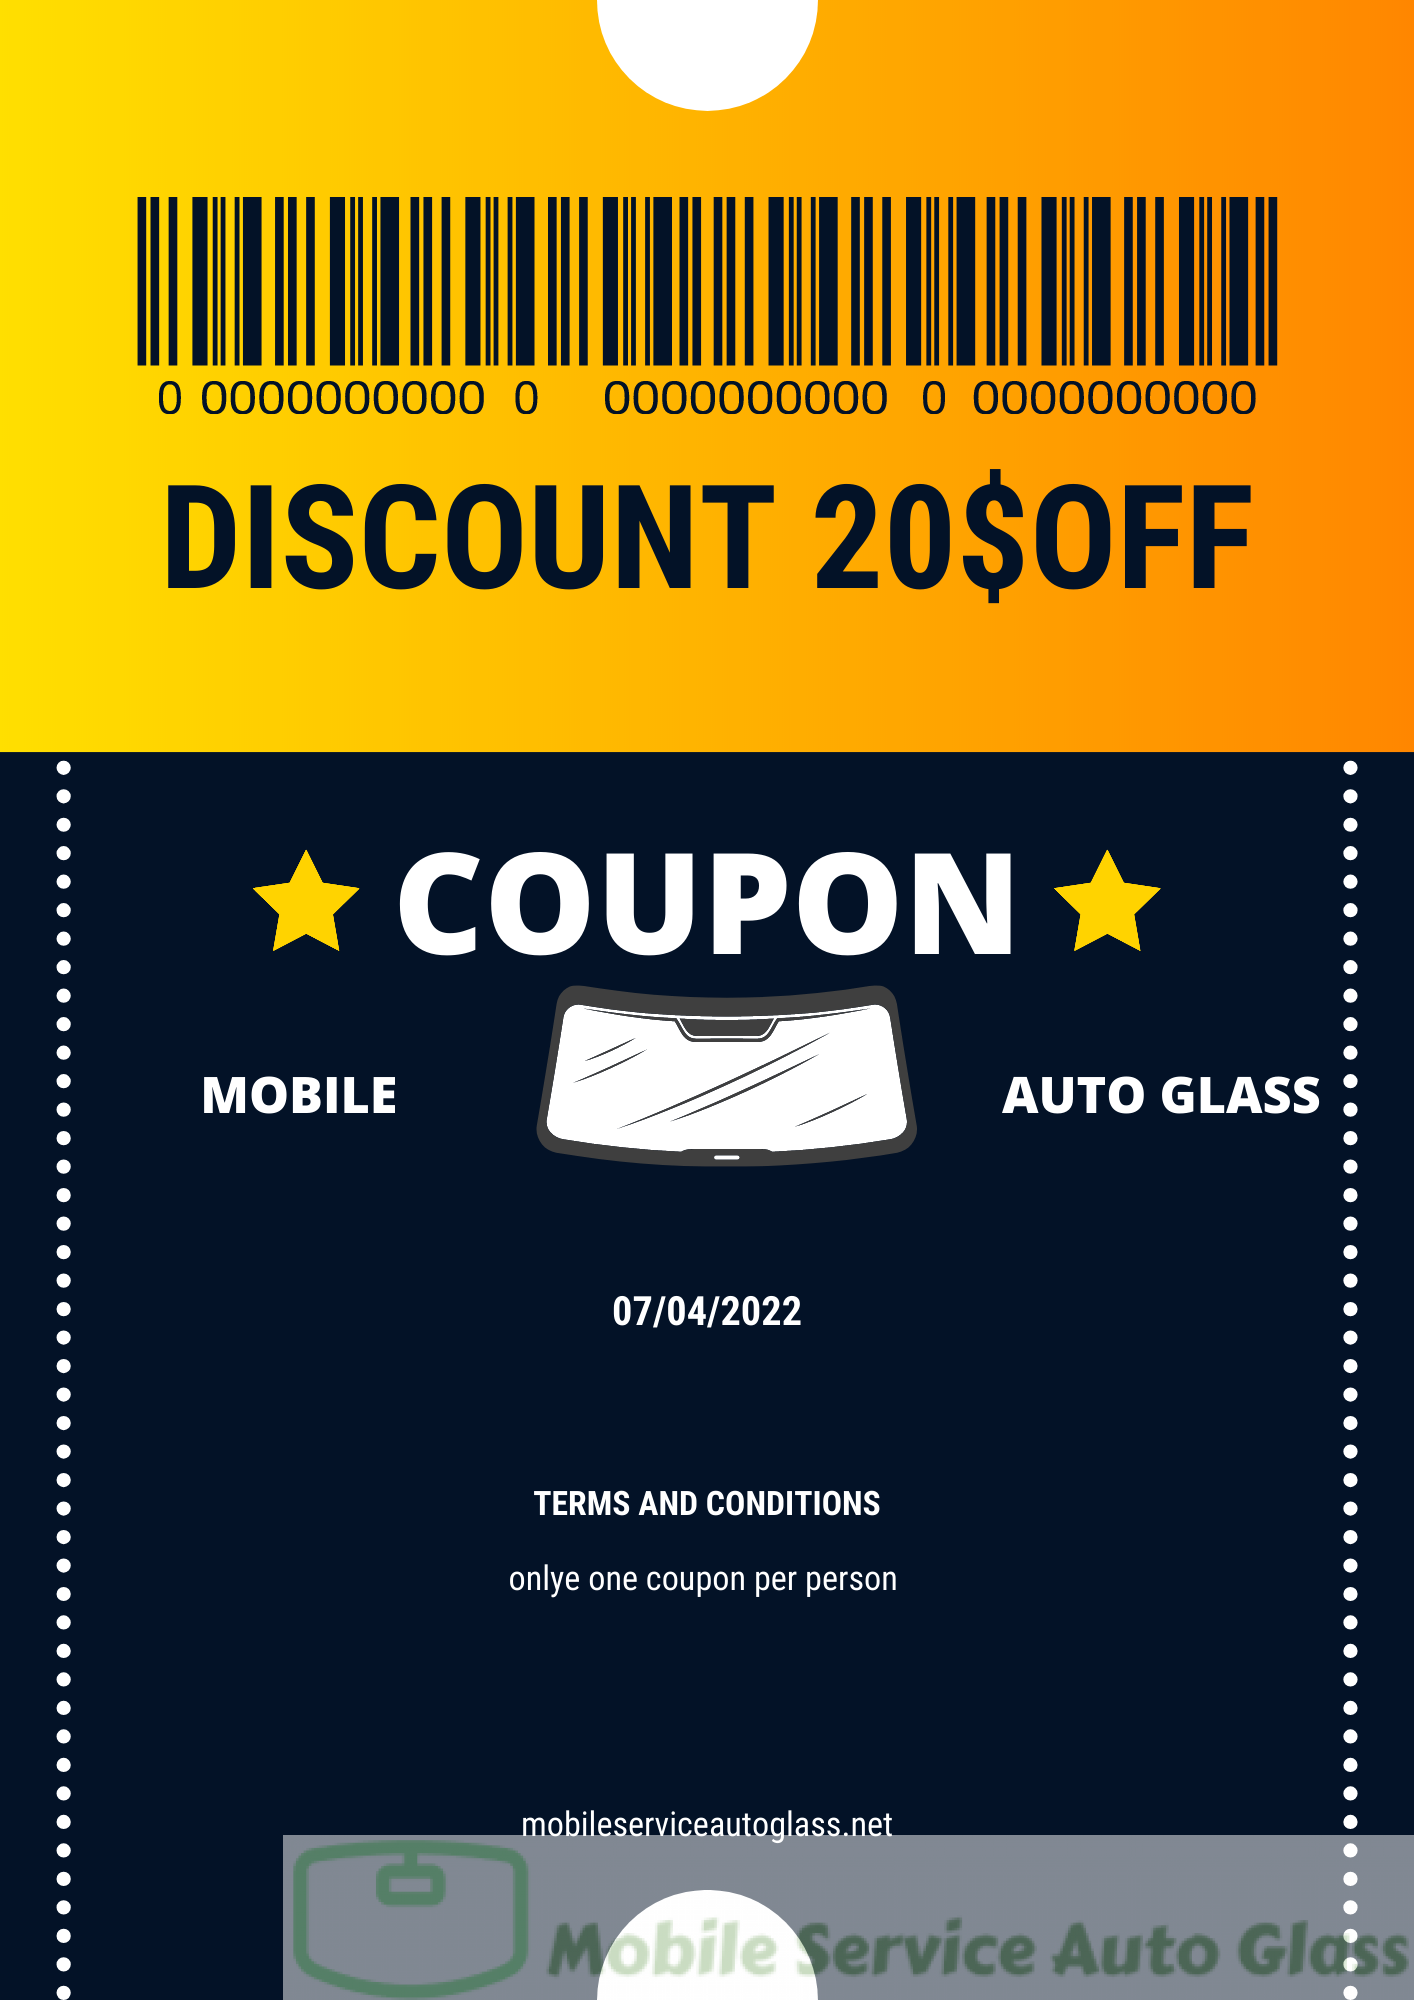 auto-glass-coupon-2022-mobile-auto-glass-windshield-replacement-and